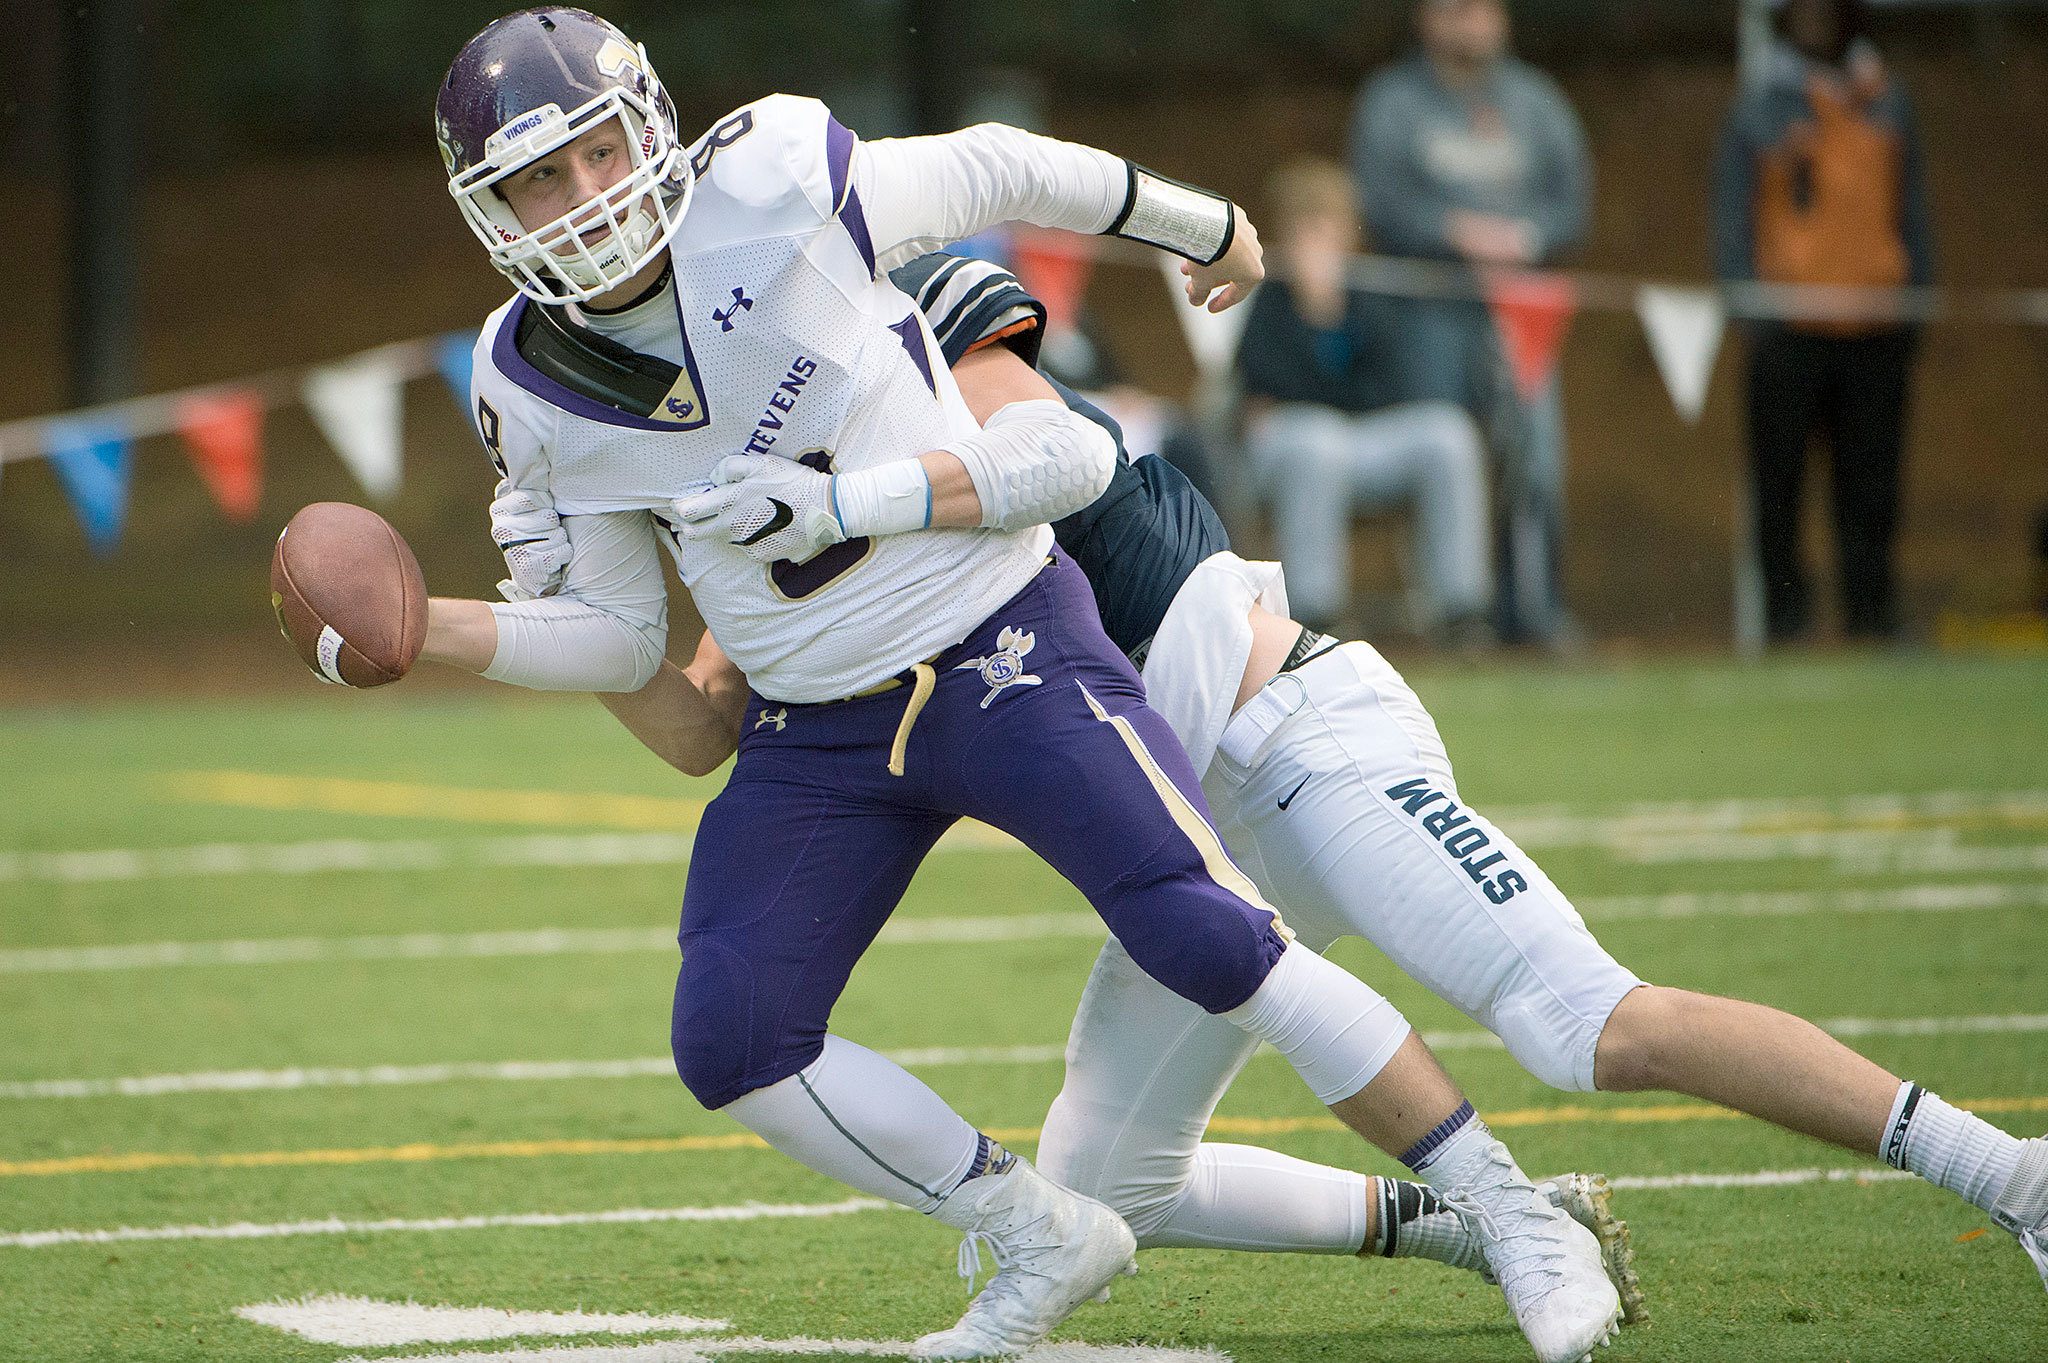 Lake Stevens quarter back Conor Bardue (8) is sacked by Skyview linebacker Cole Grossman (3) during the first quarter of a playoff game Saturday at Kiggins Bowl in Vancouver. (For The Daily Herald / Troy Wayrynen)